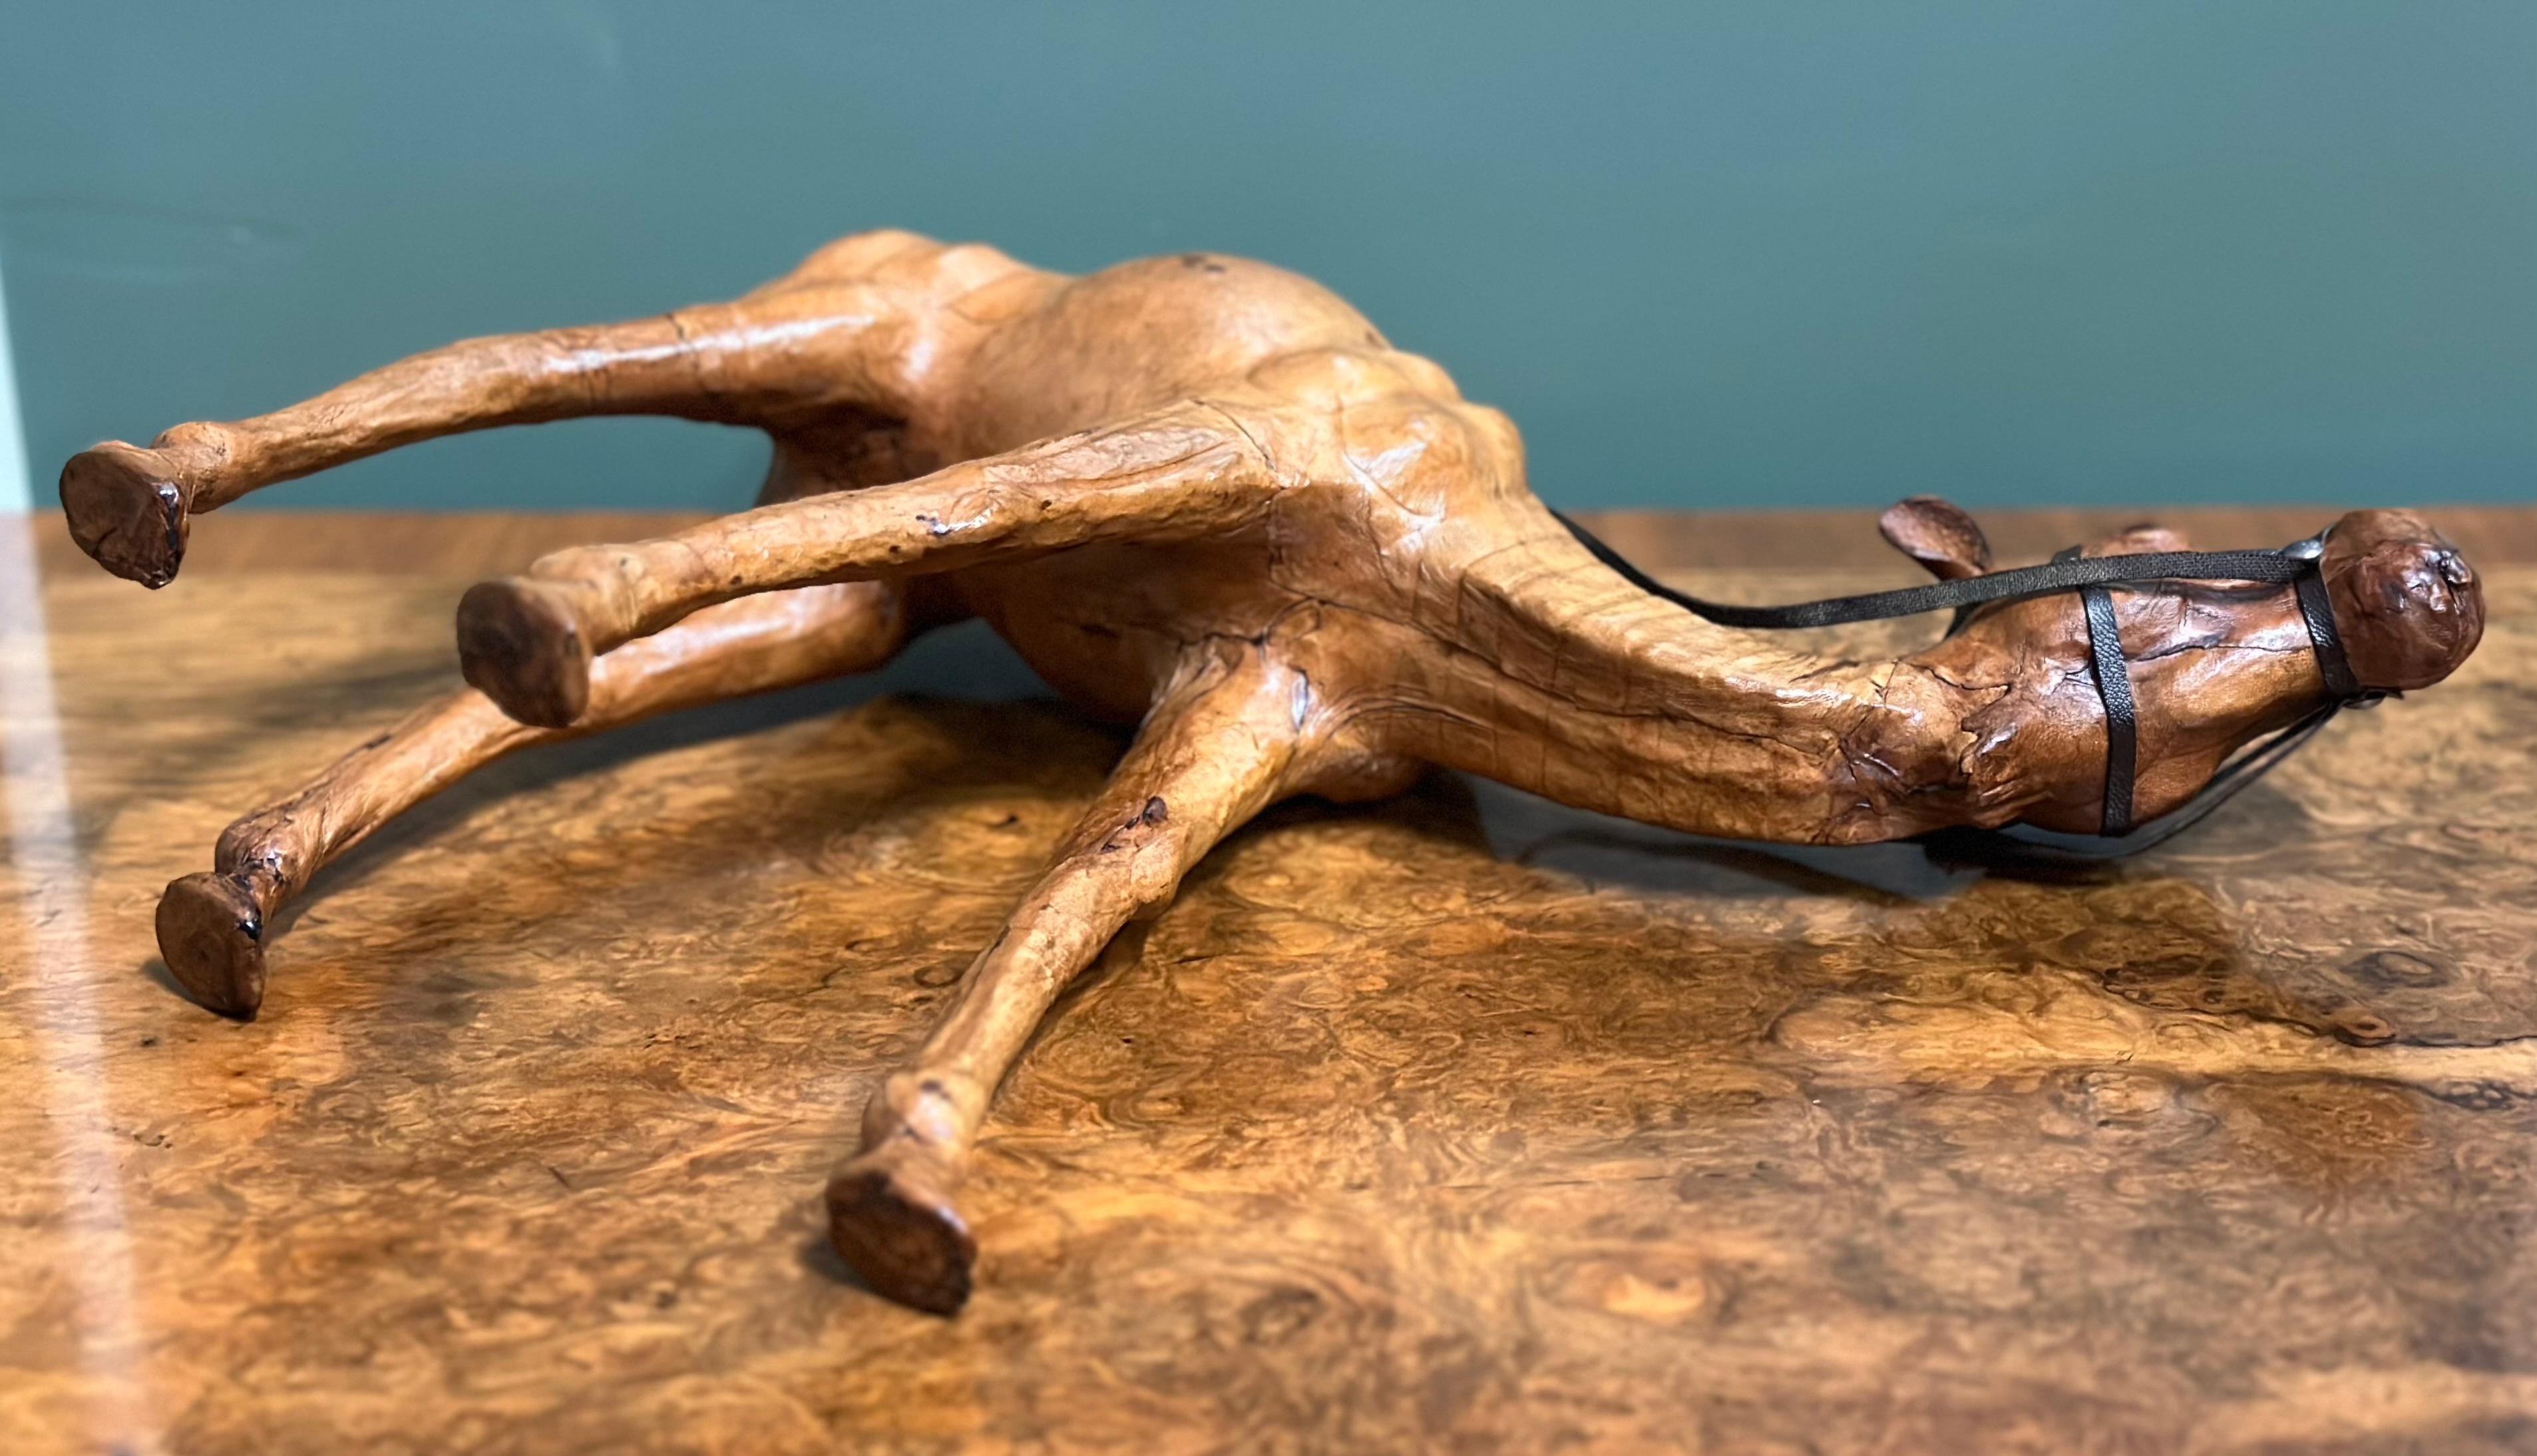 We are excited to present this camel sculpture with lovely aged leather on hand-carved wood.
It has been made for Liberty's in London.

This full-grown and very realistic dromedary or camel has both great aesthetic and decretive value.
They have